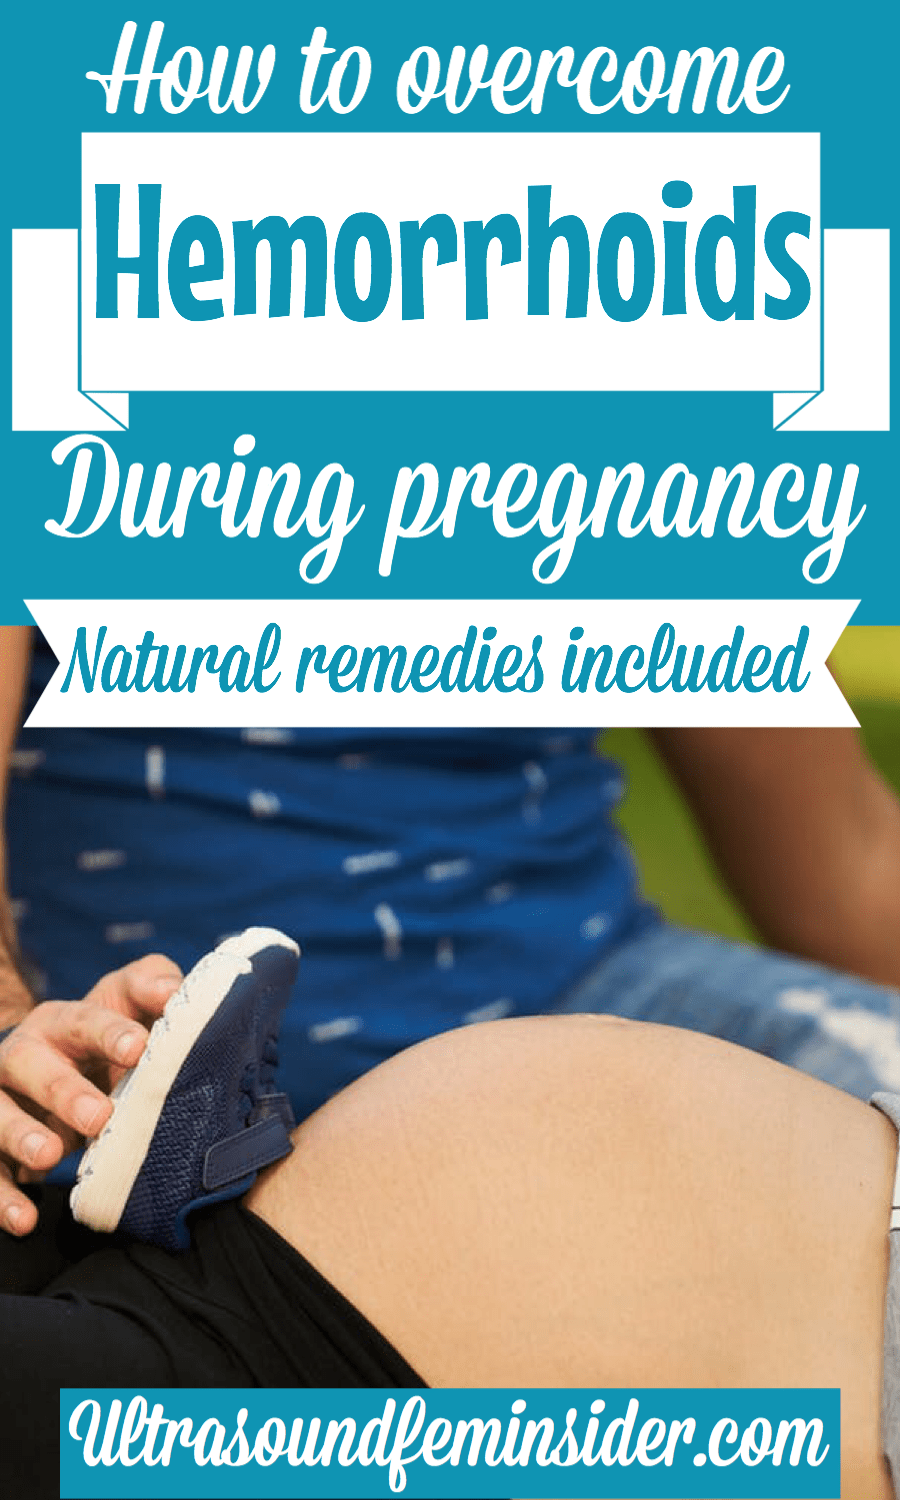 Hemorrhoid during pregnancy is one of the most common symptoms, mainly in the last two trimesters of pregnancy, and if you are one of those mommies who suffer from constipation. In this post learn about how to prevent and treat hemorrhoids during pregnancy in a natural way. #hemorrhoids #hemorrhoidsduringpregnancy #pregnancyhemorrhoids #howto #pregnancy